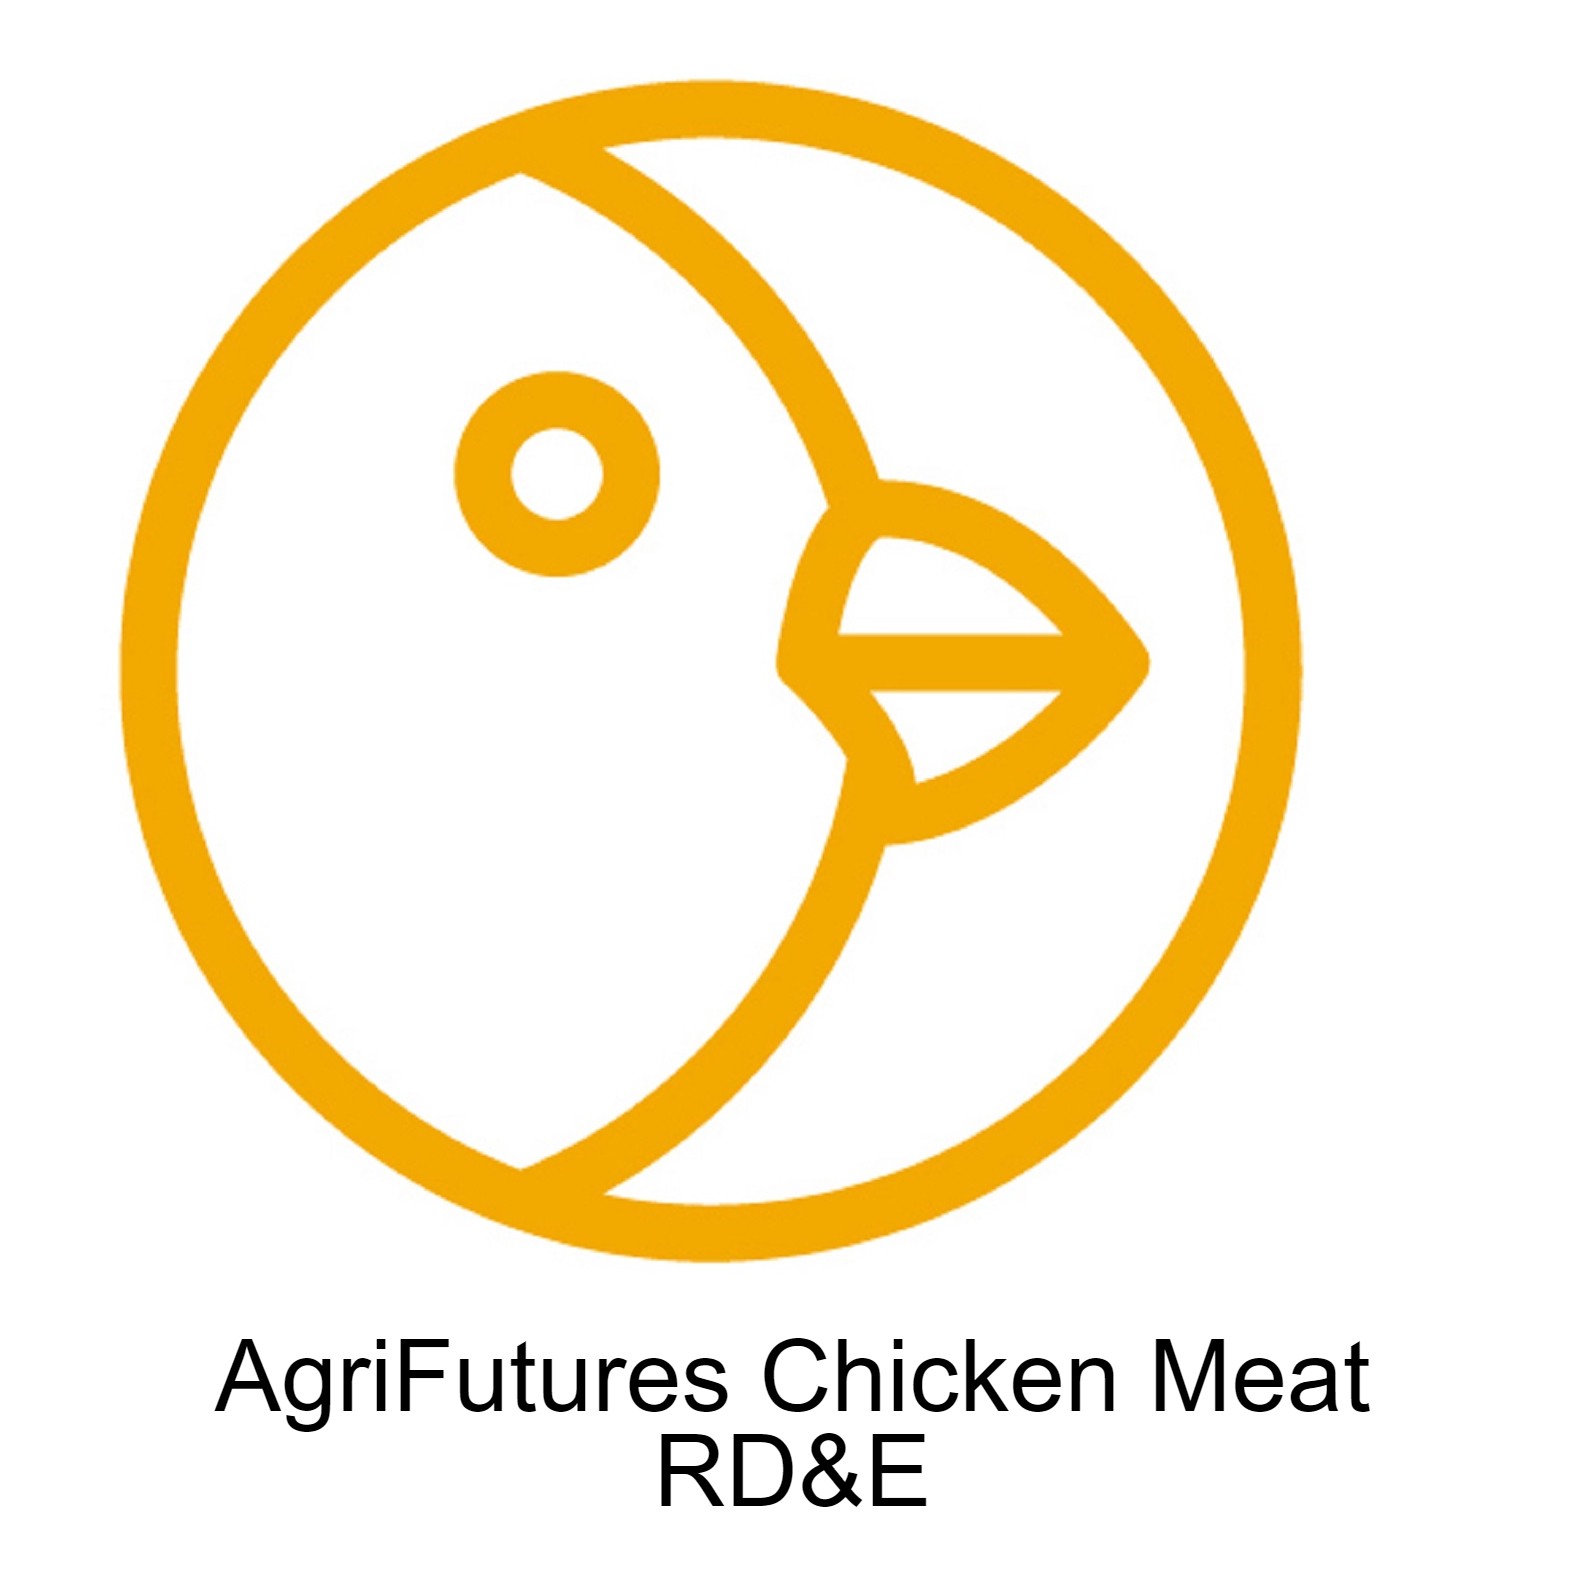 AgriFutures Chicken Meat RD&E